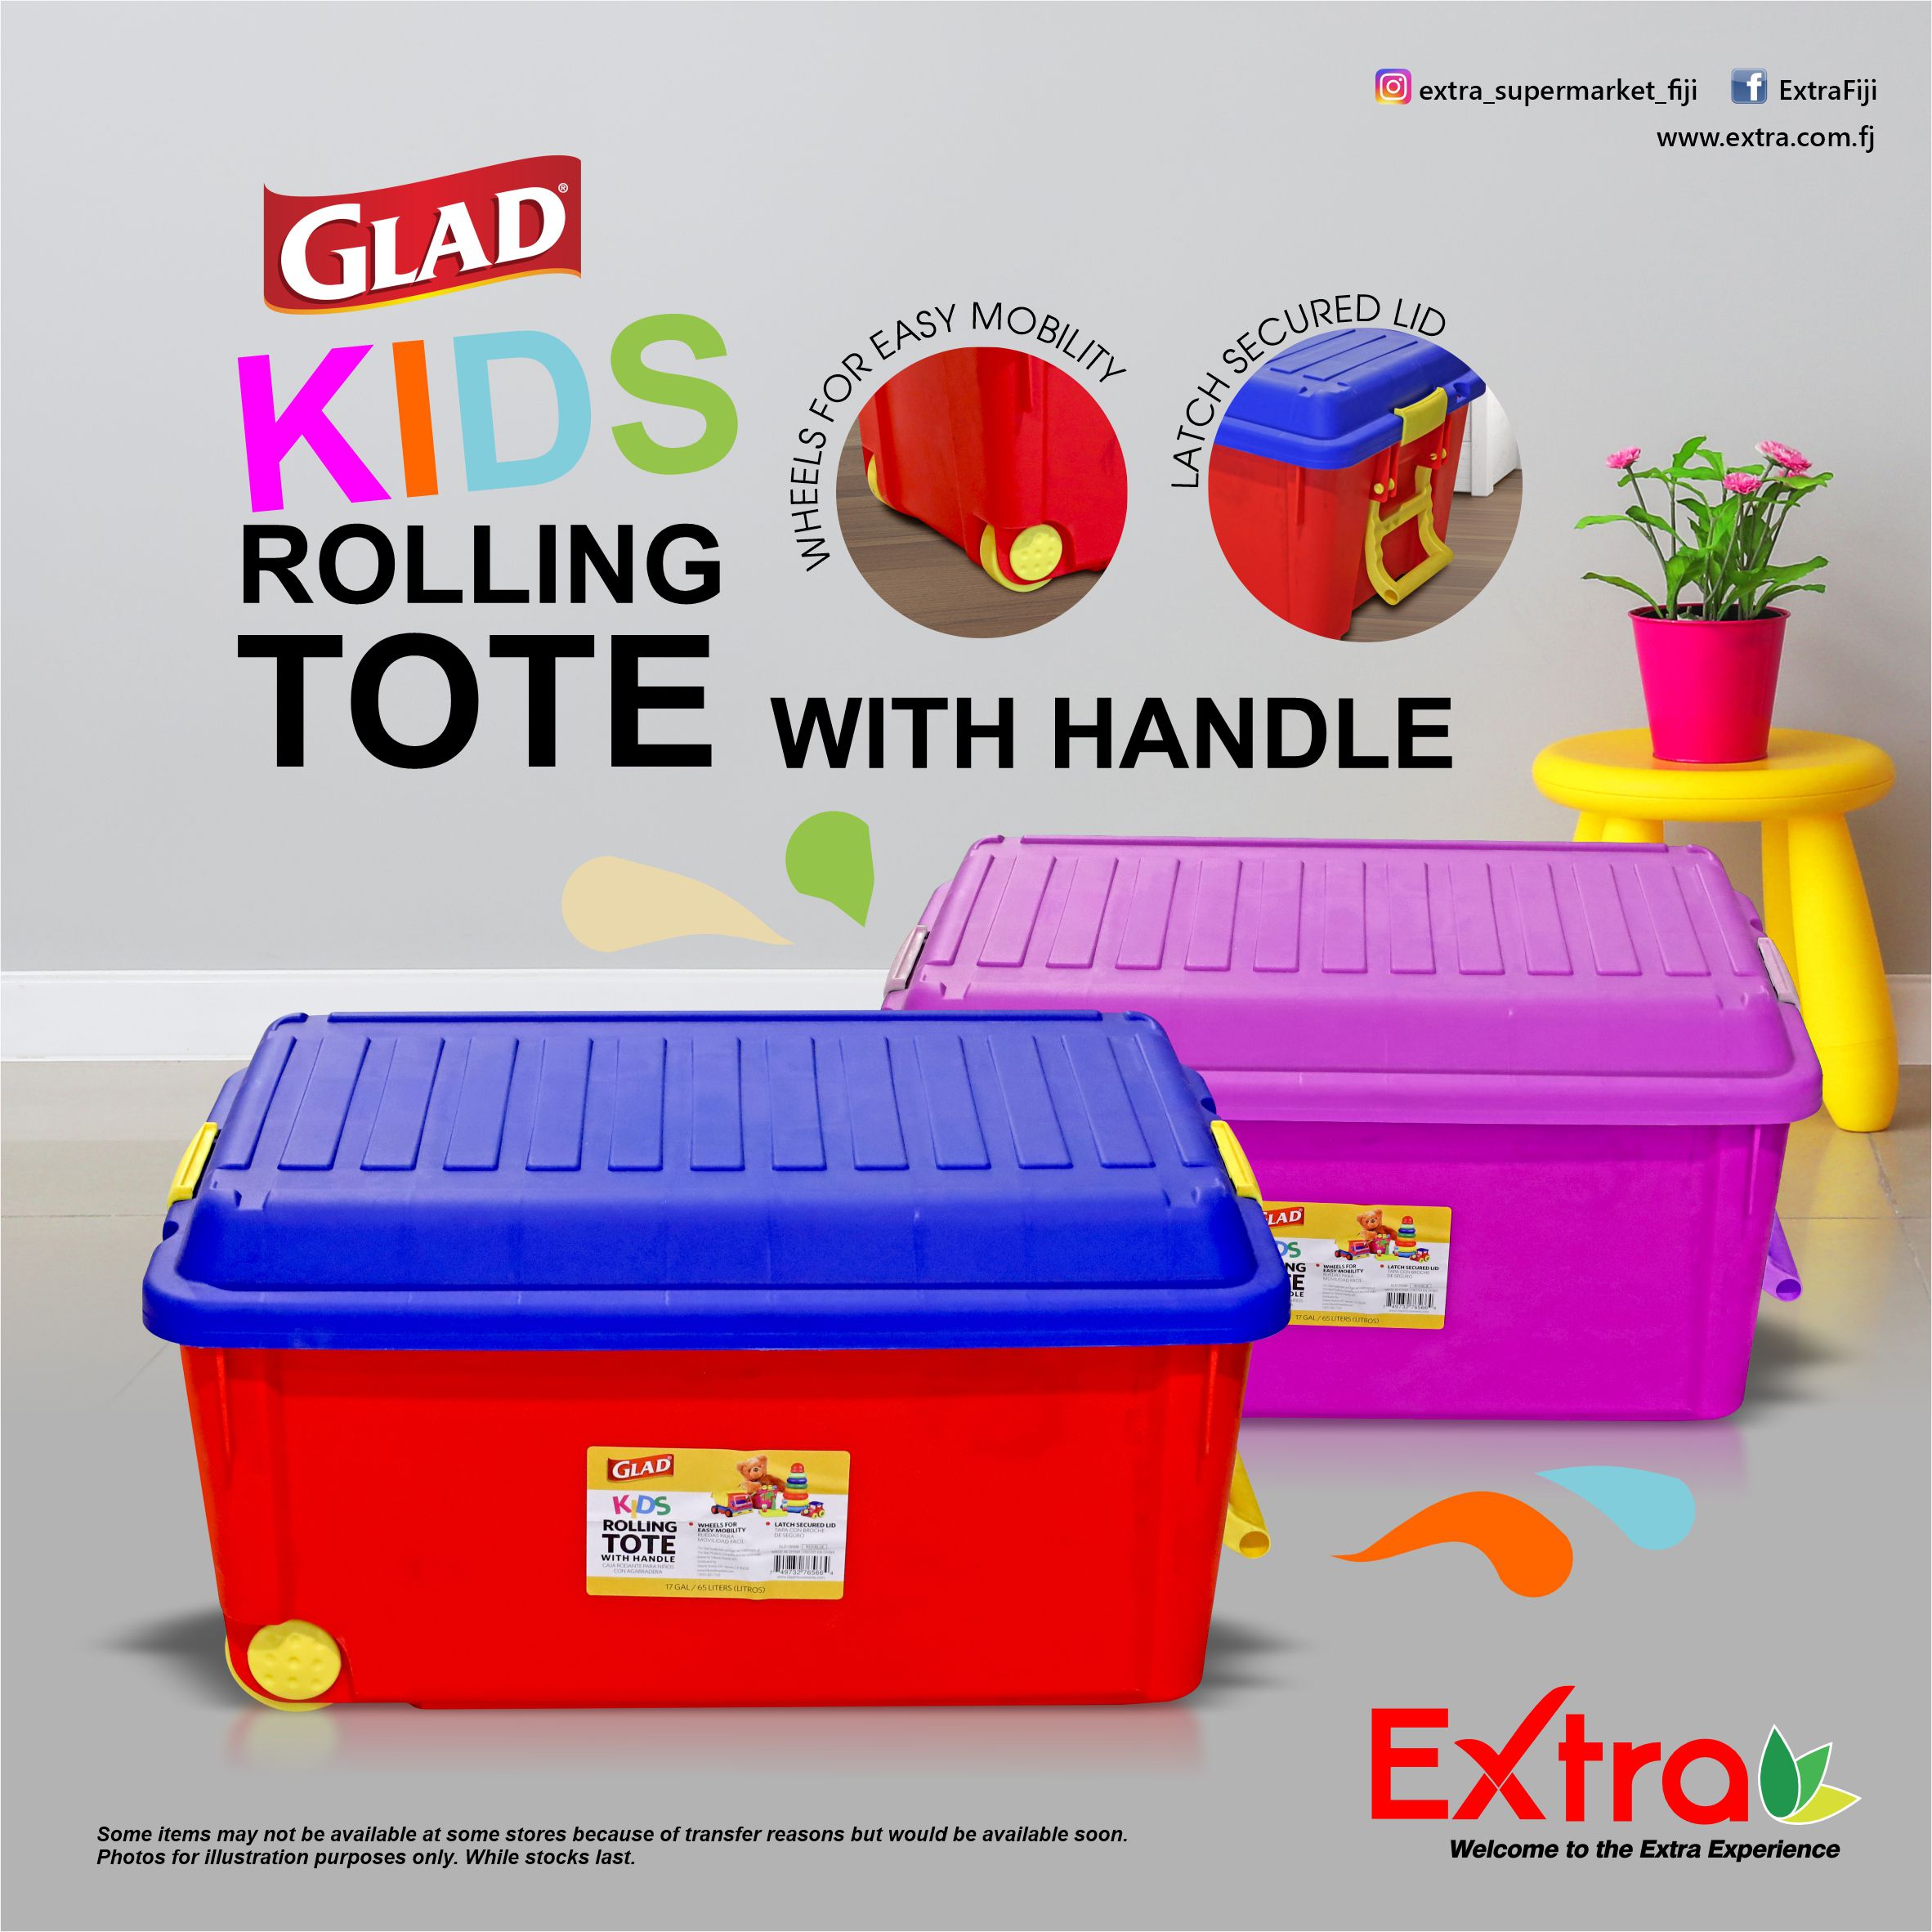 https://extra.com.fj/wp-content/uploads/2023/01/11-01-2023-Glad-Kids-Rolling-Tote-With-Handle-Purple.jpg